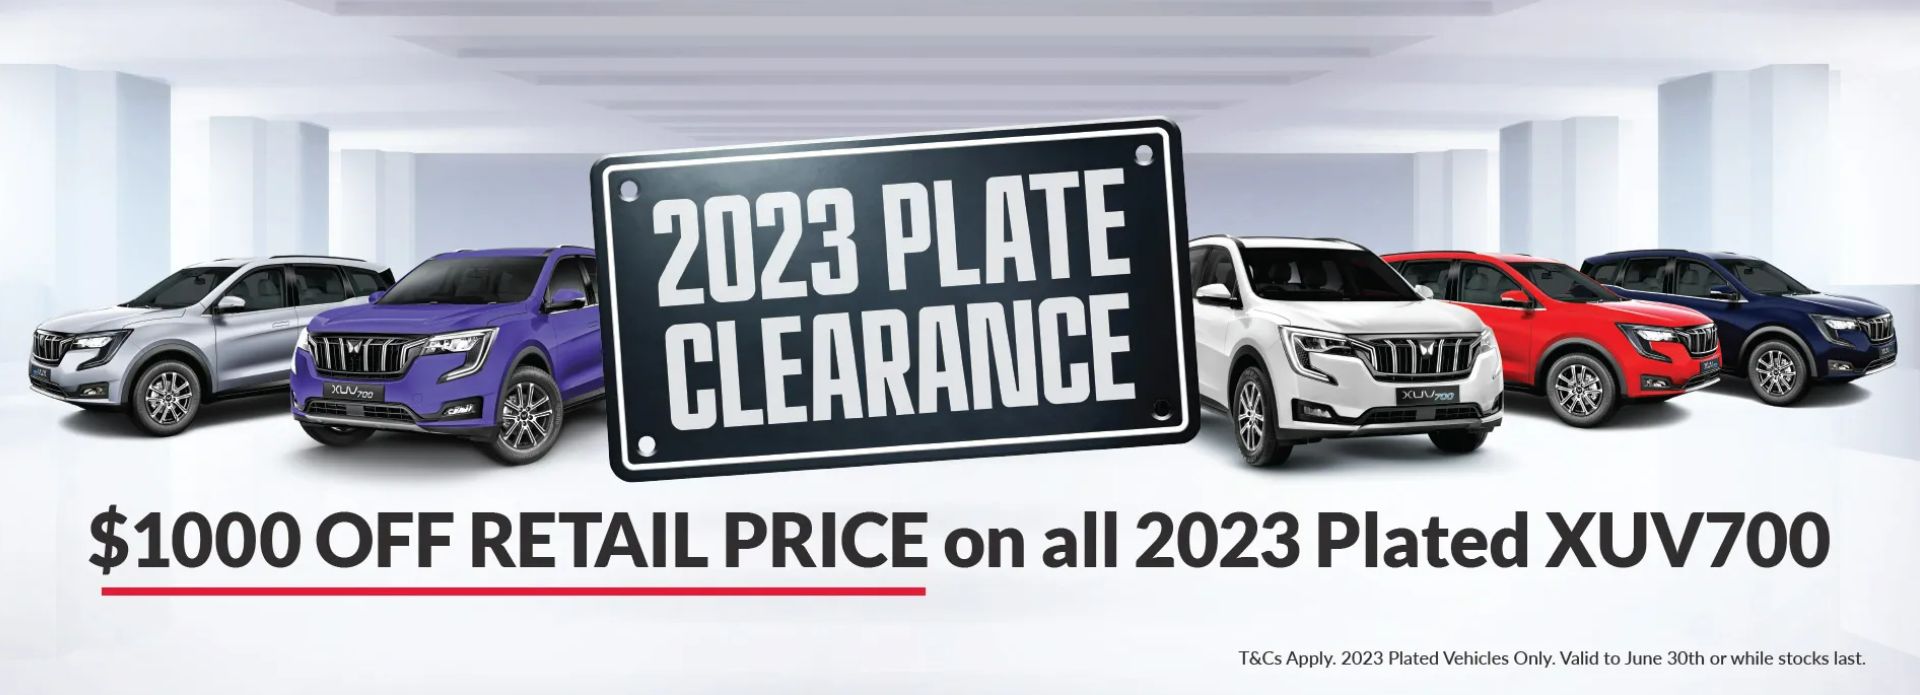 2023 Plate Clearance $1000 OFF RETAIL PRICE on all 2023 Plated XUV700